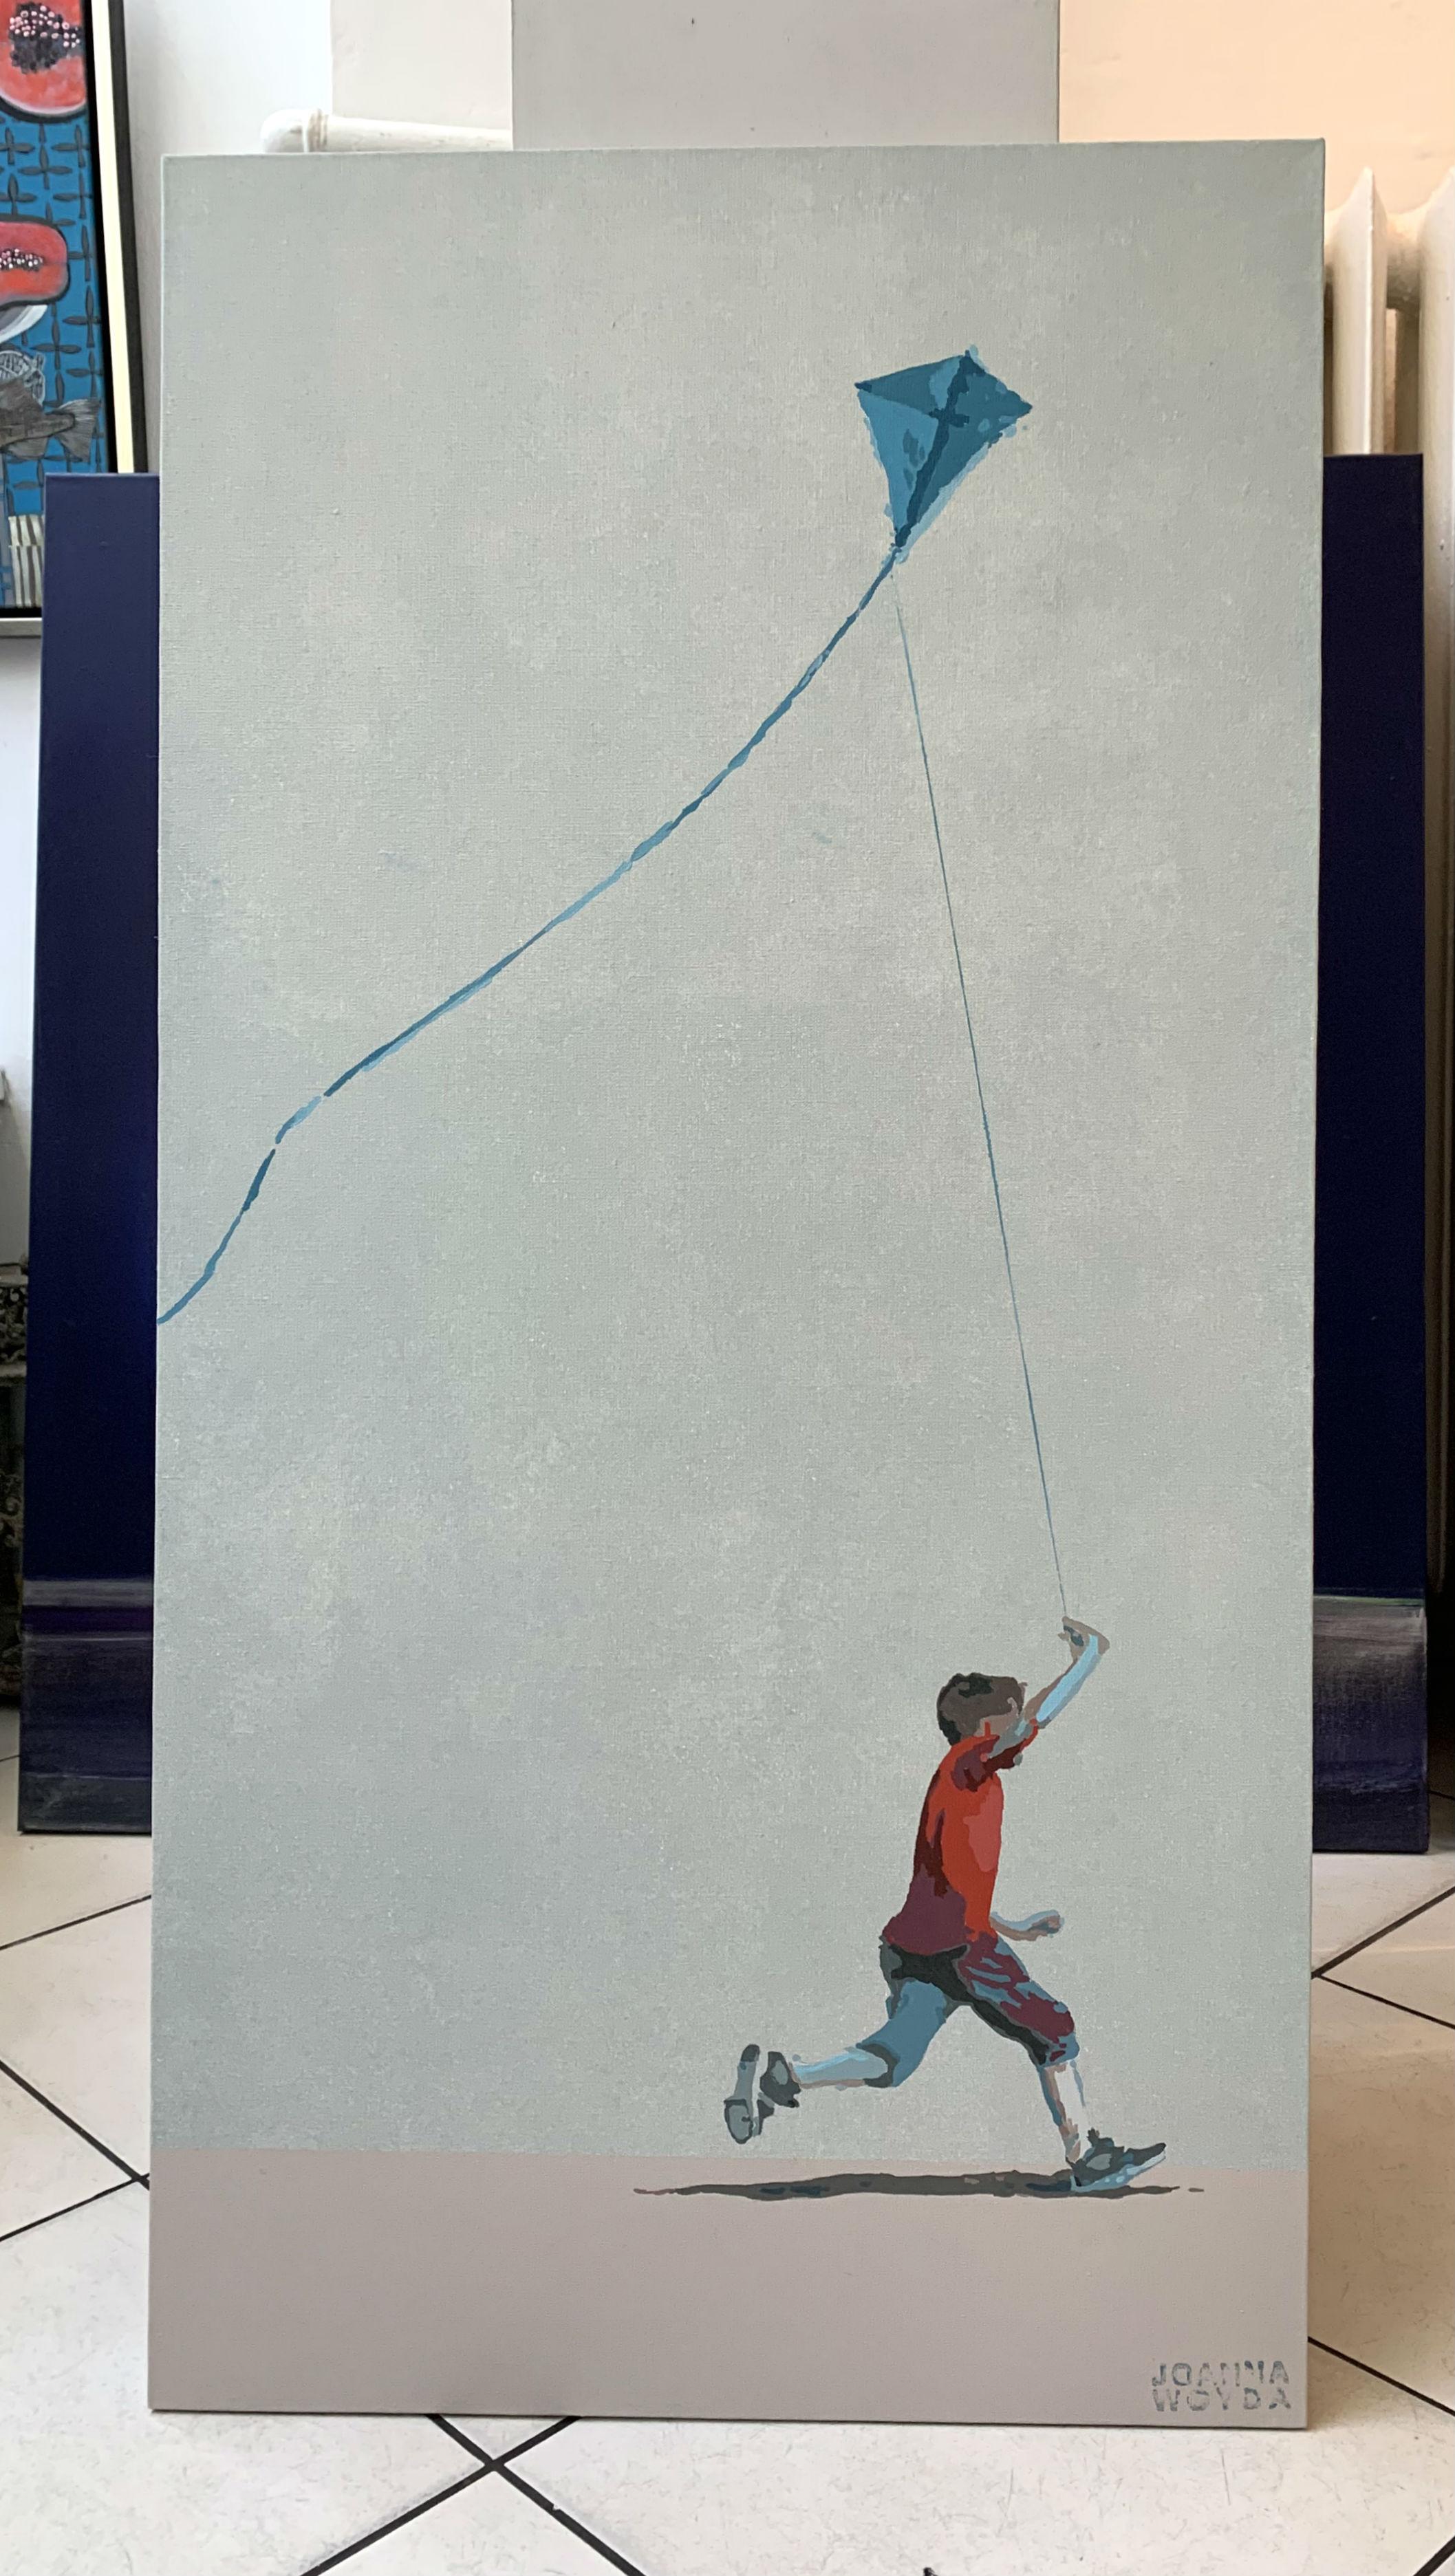 Boy in a red blouse with a kite - Contemporary Figurative Painting, Minimalism - Gray Portrait Painting by Joanna Woyda